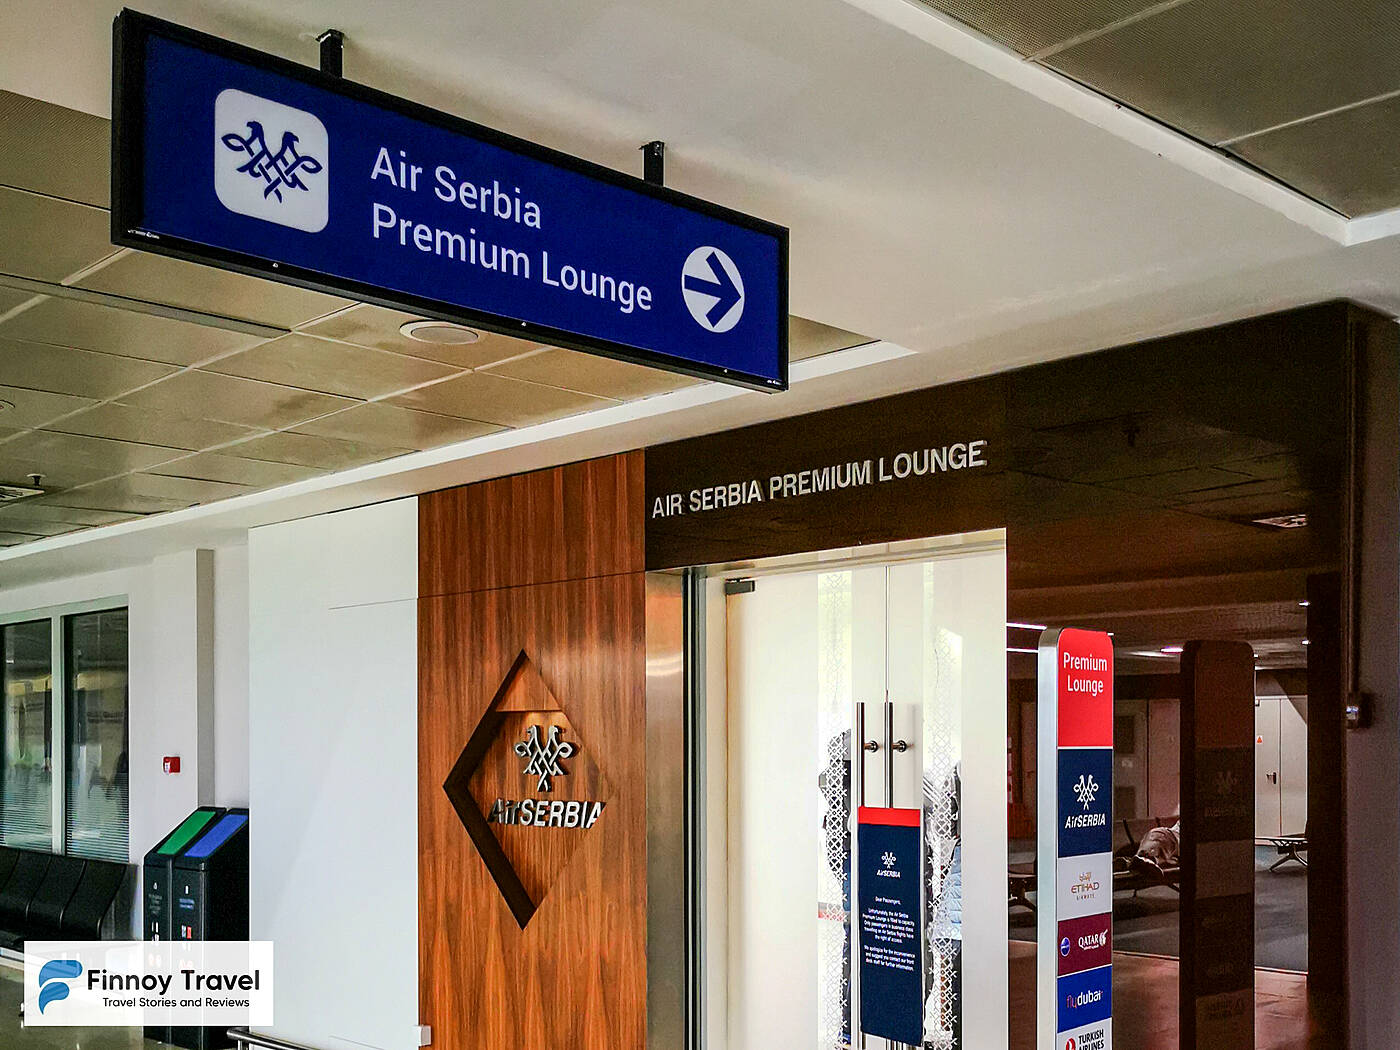 There were clear directional signs to Air Serbia Premium Lounge at Belgrade Airport